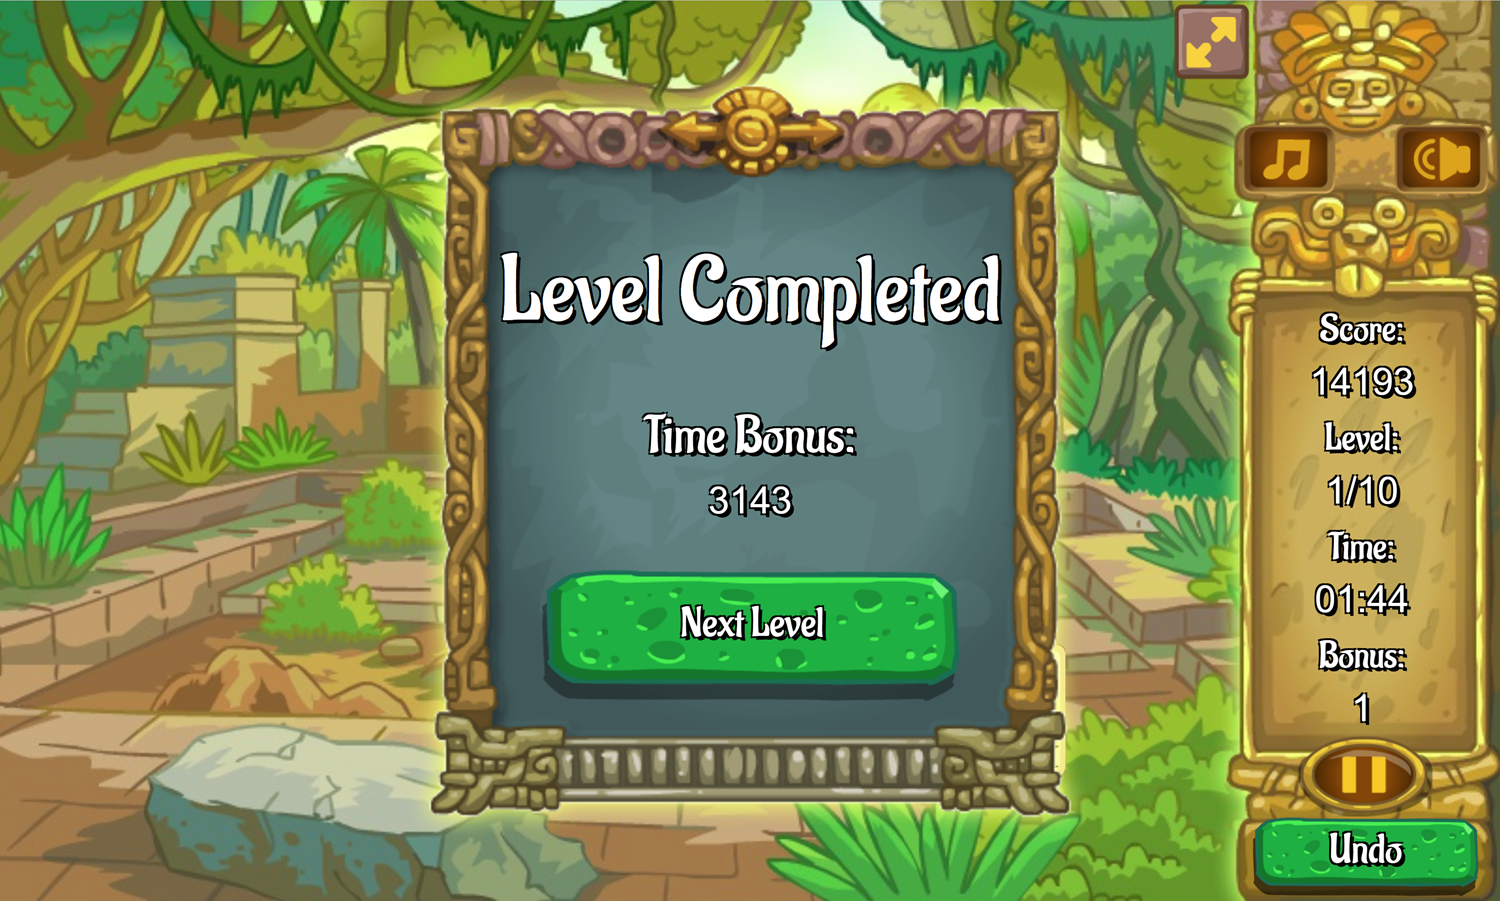 Inca Pyramid Solitaire Game Level Completed Screen Screenshot.